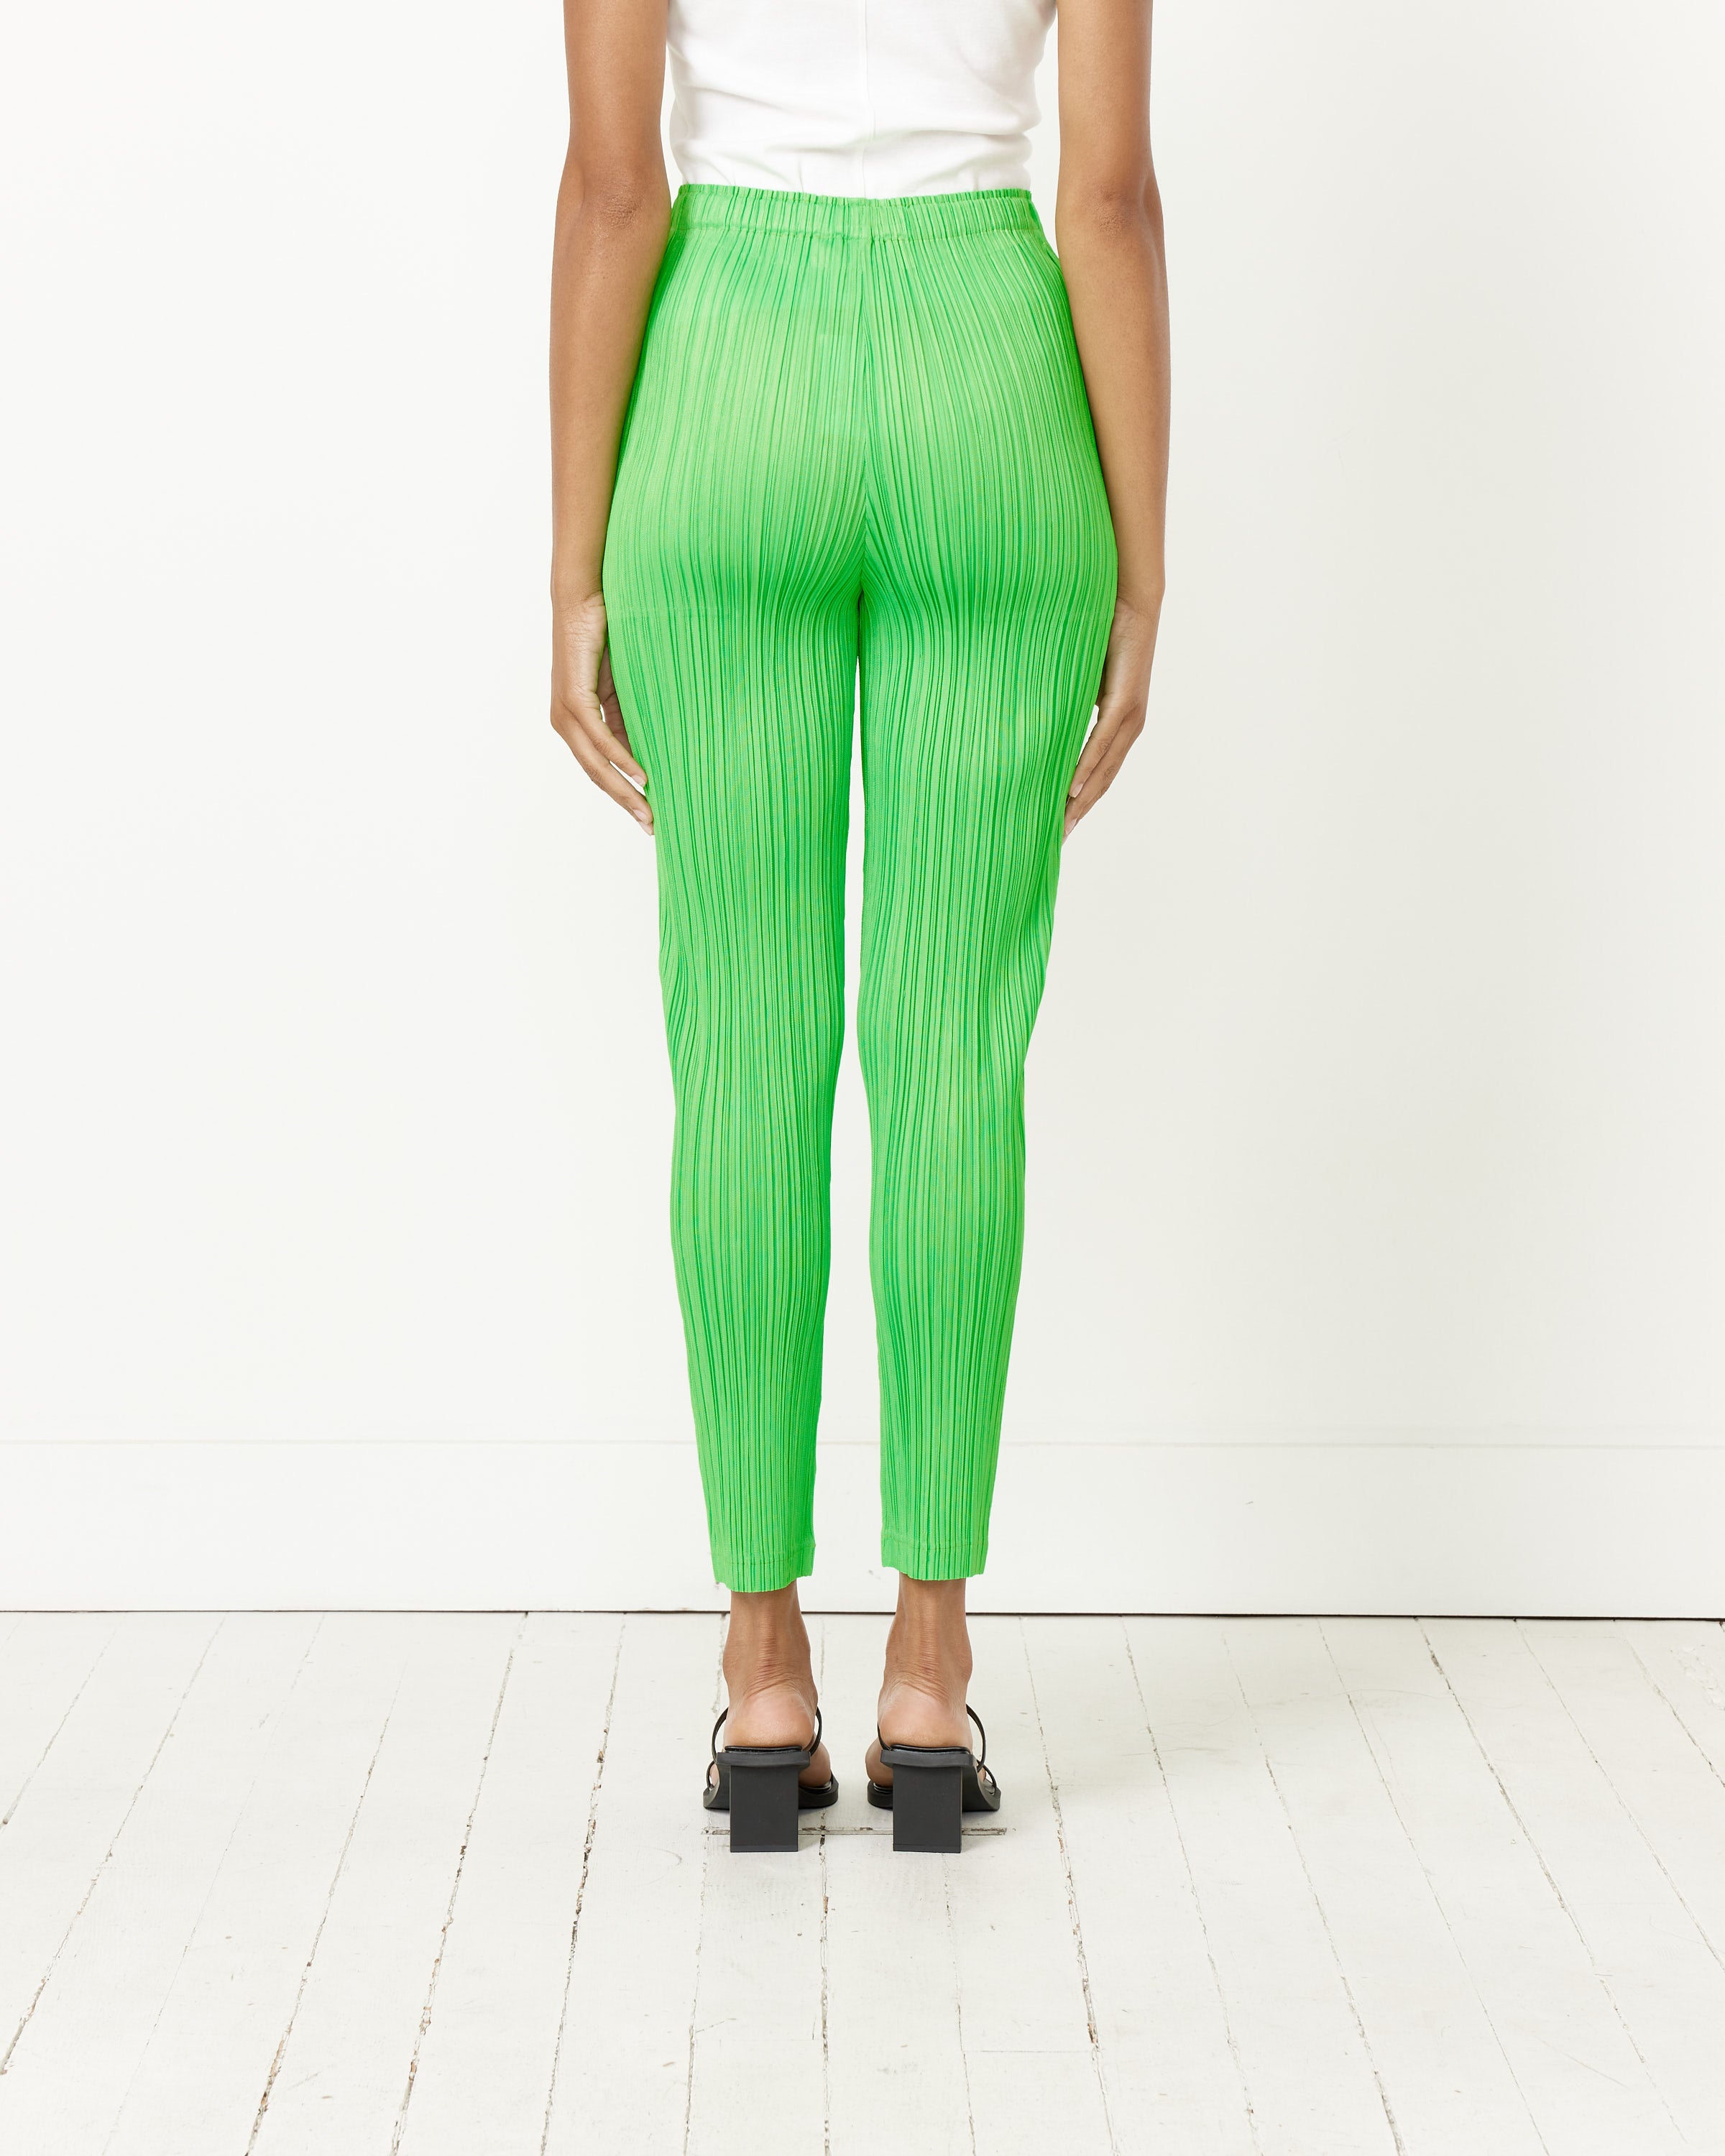 Thicker Bottoms 2 Pant in Bright Green in Dark Brown